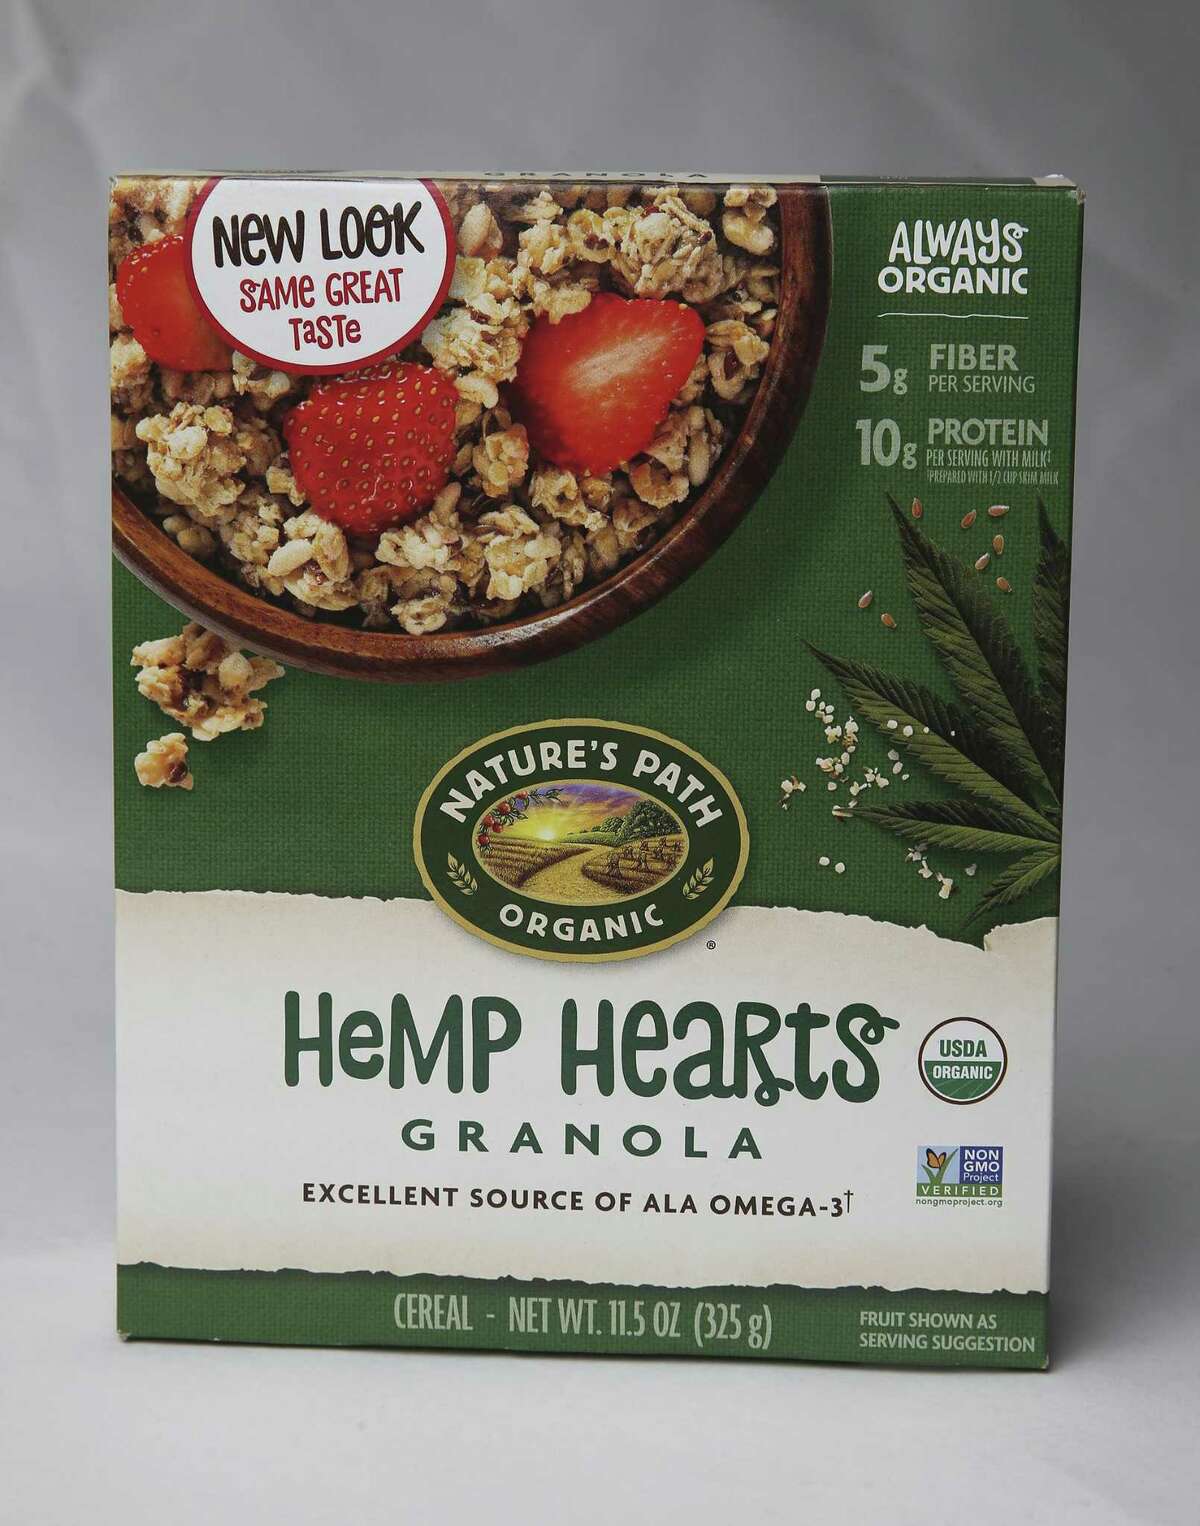 Hemp products on August 21, 2018.